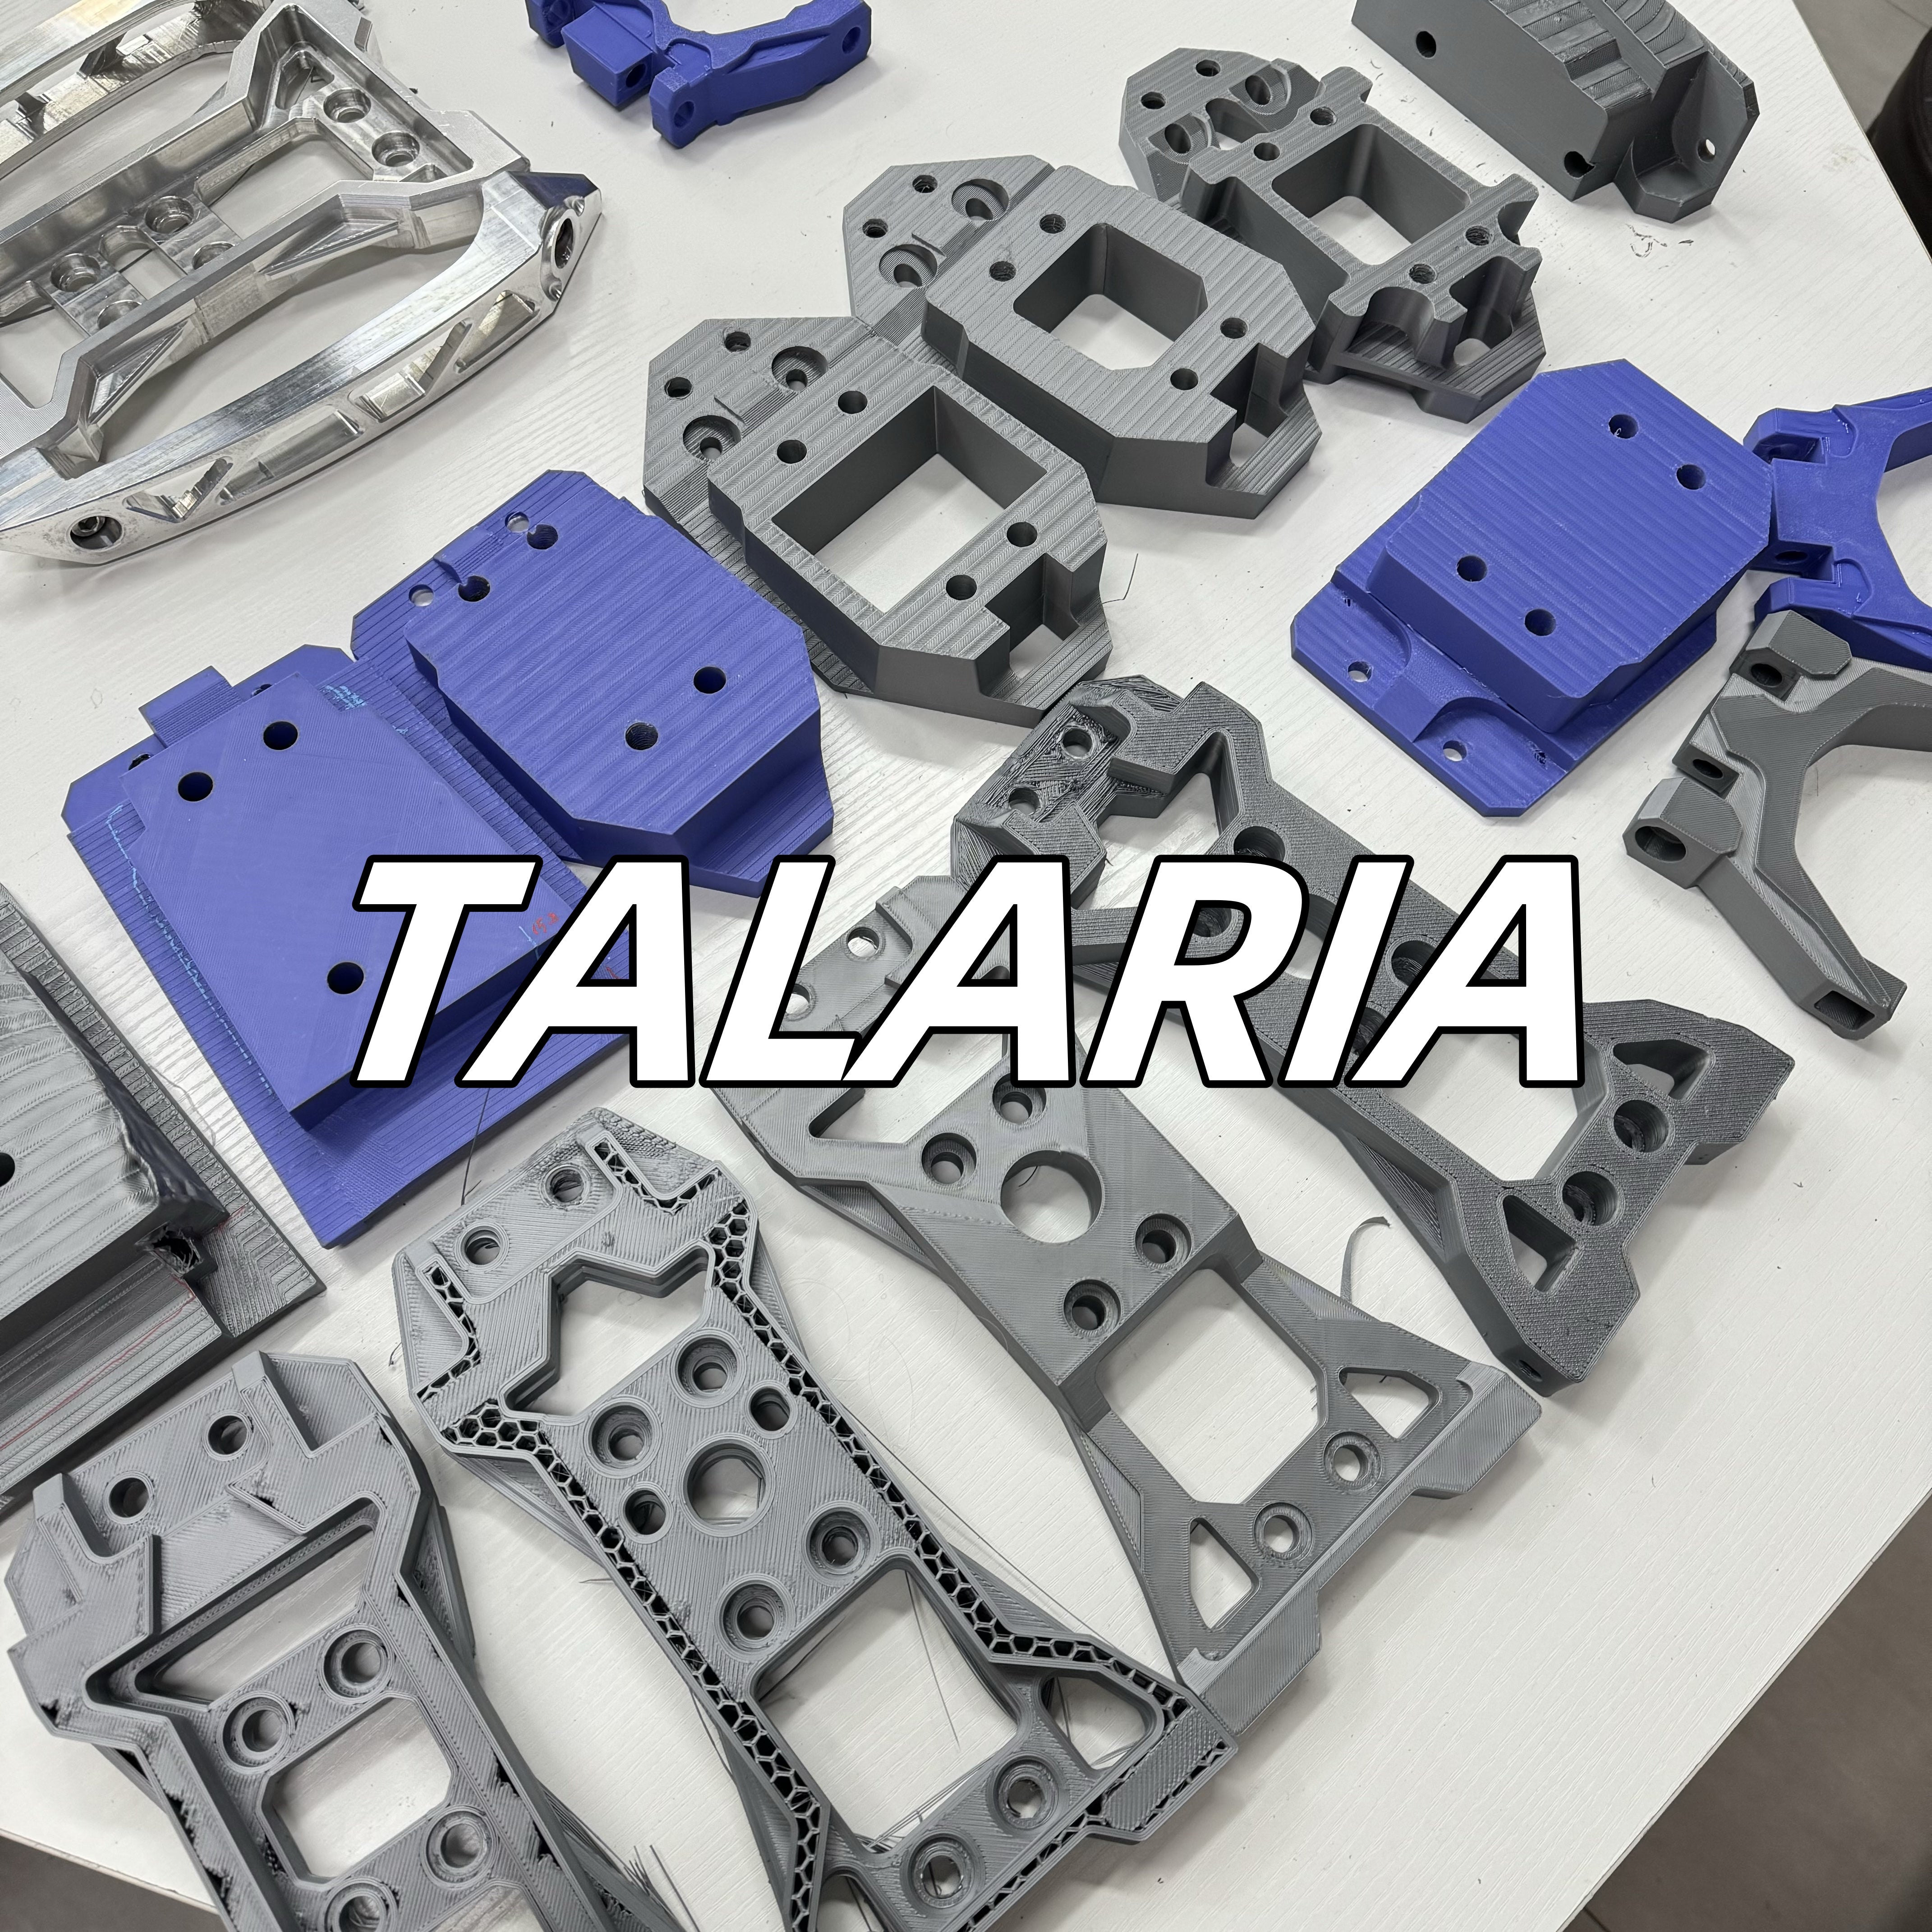 Starting to design a rack kit for Talaria!